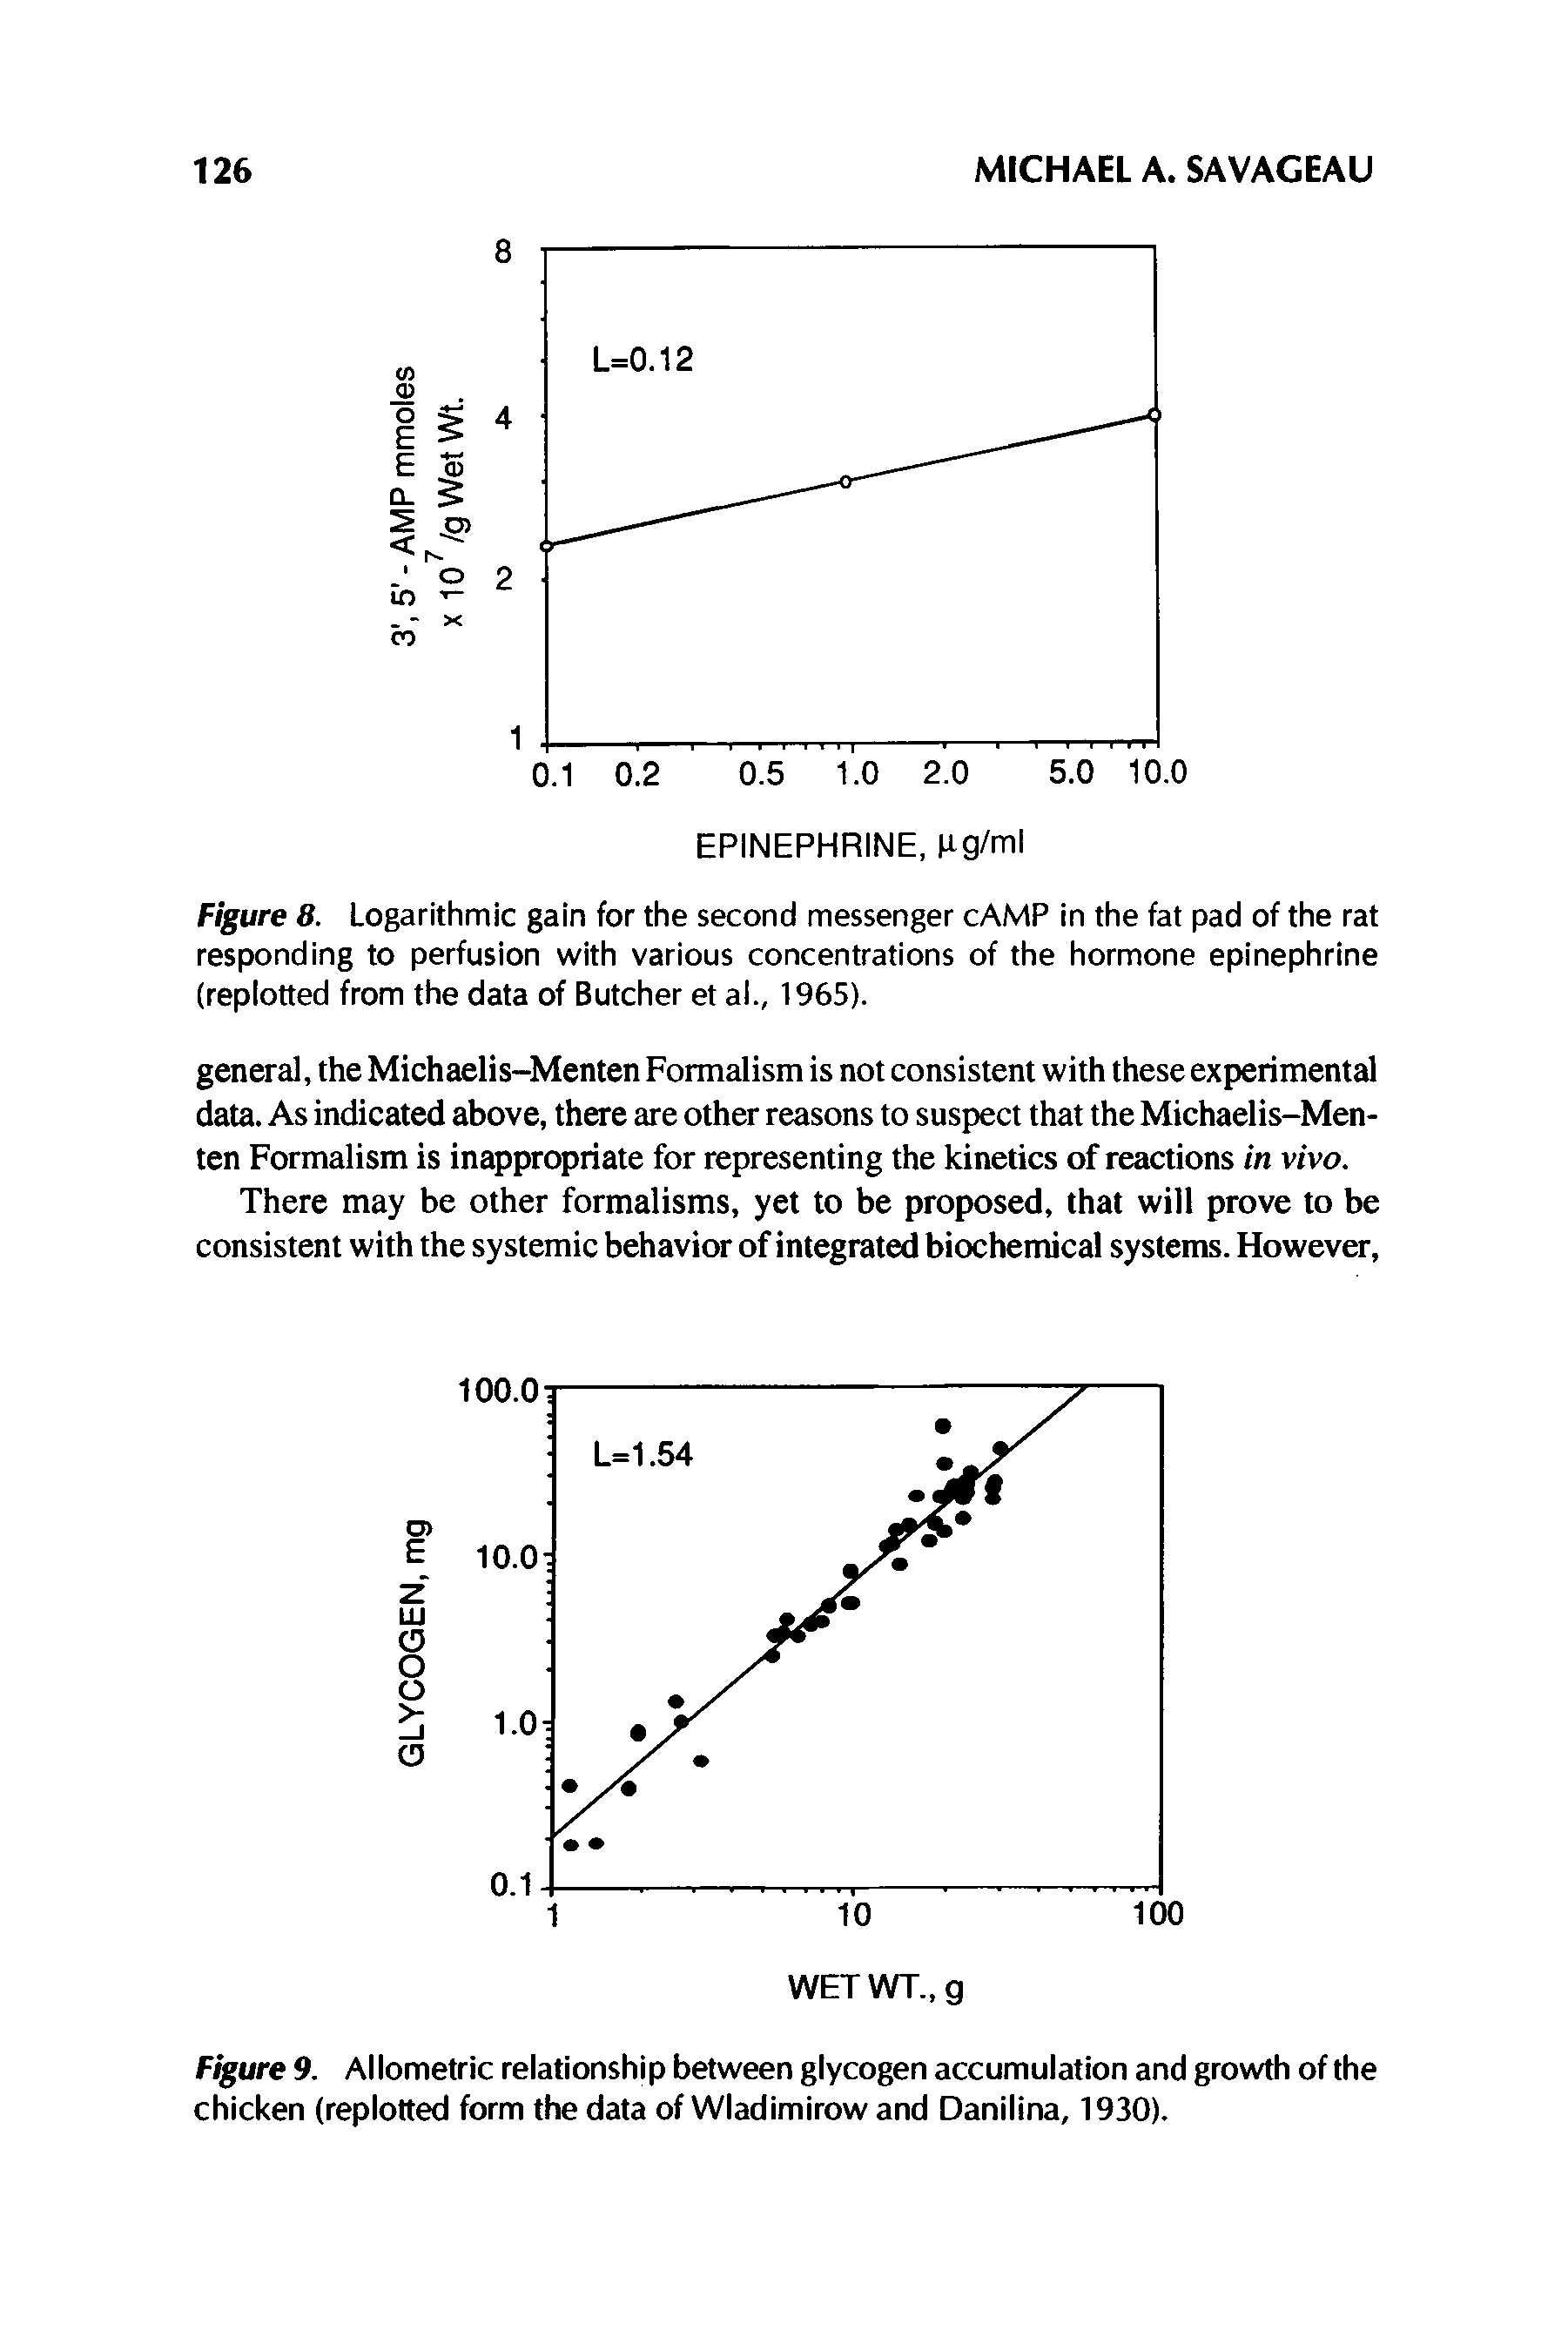 Figure 9. Allometric relationship between glycogen accumulation and growth of the chicken (replotted form the data of Wladimirow and Danilina, 1930).